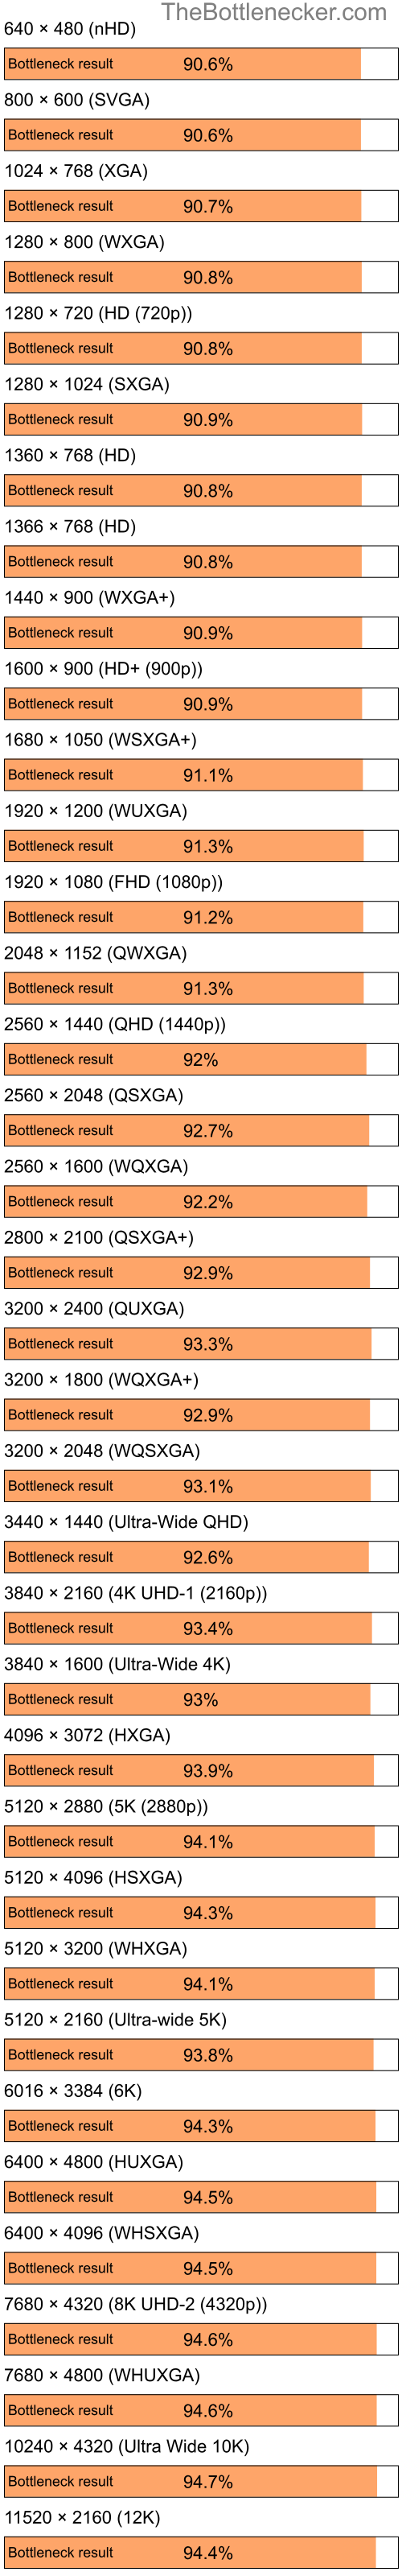 Bottleneck results by resolution for Intel Atom Z520 and AMD Radeon 9200 in7 Days to Die